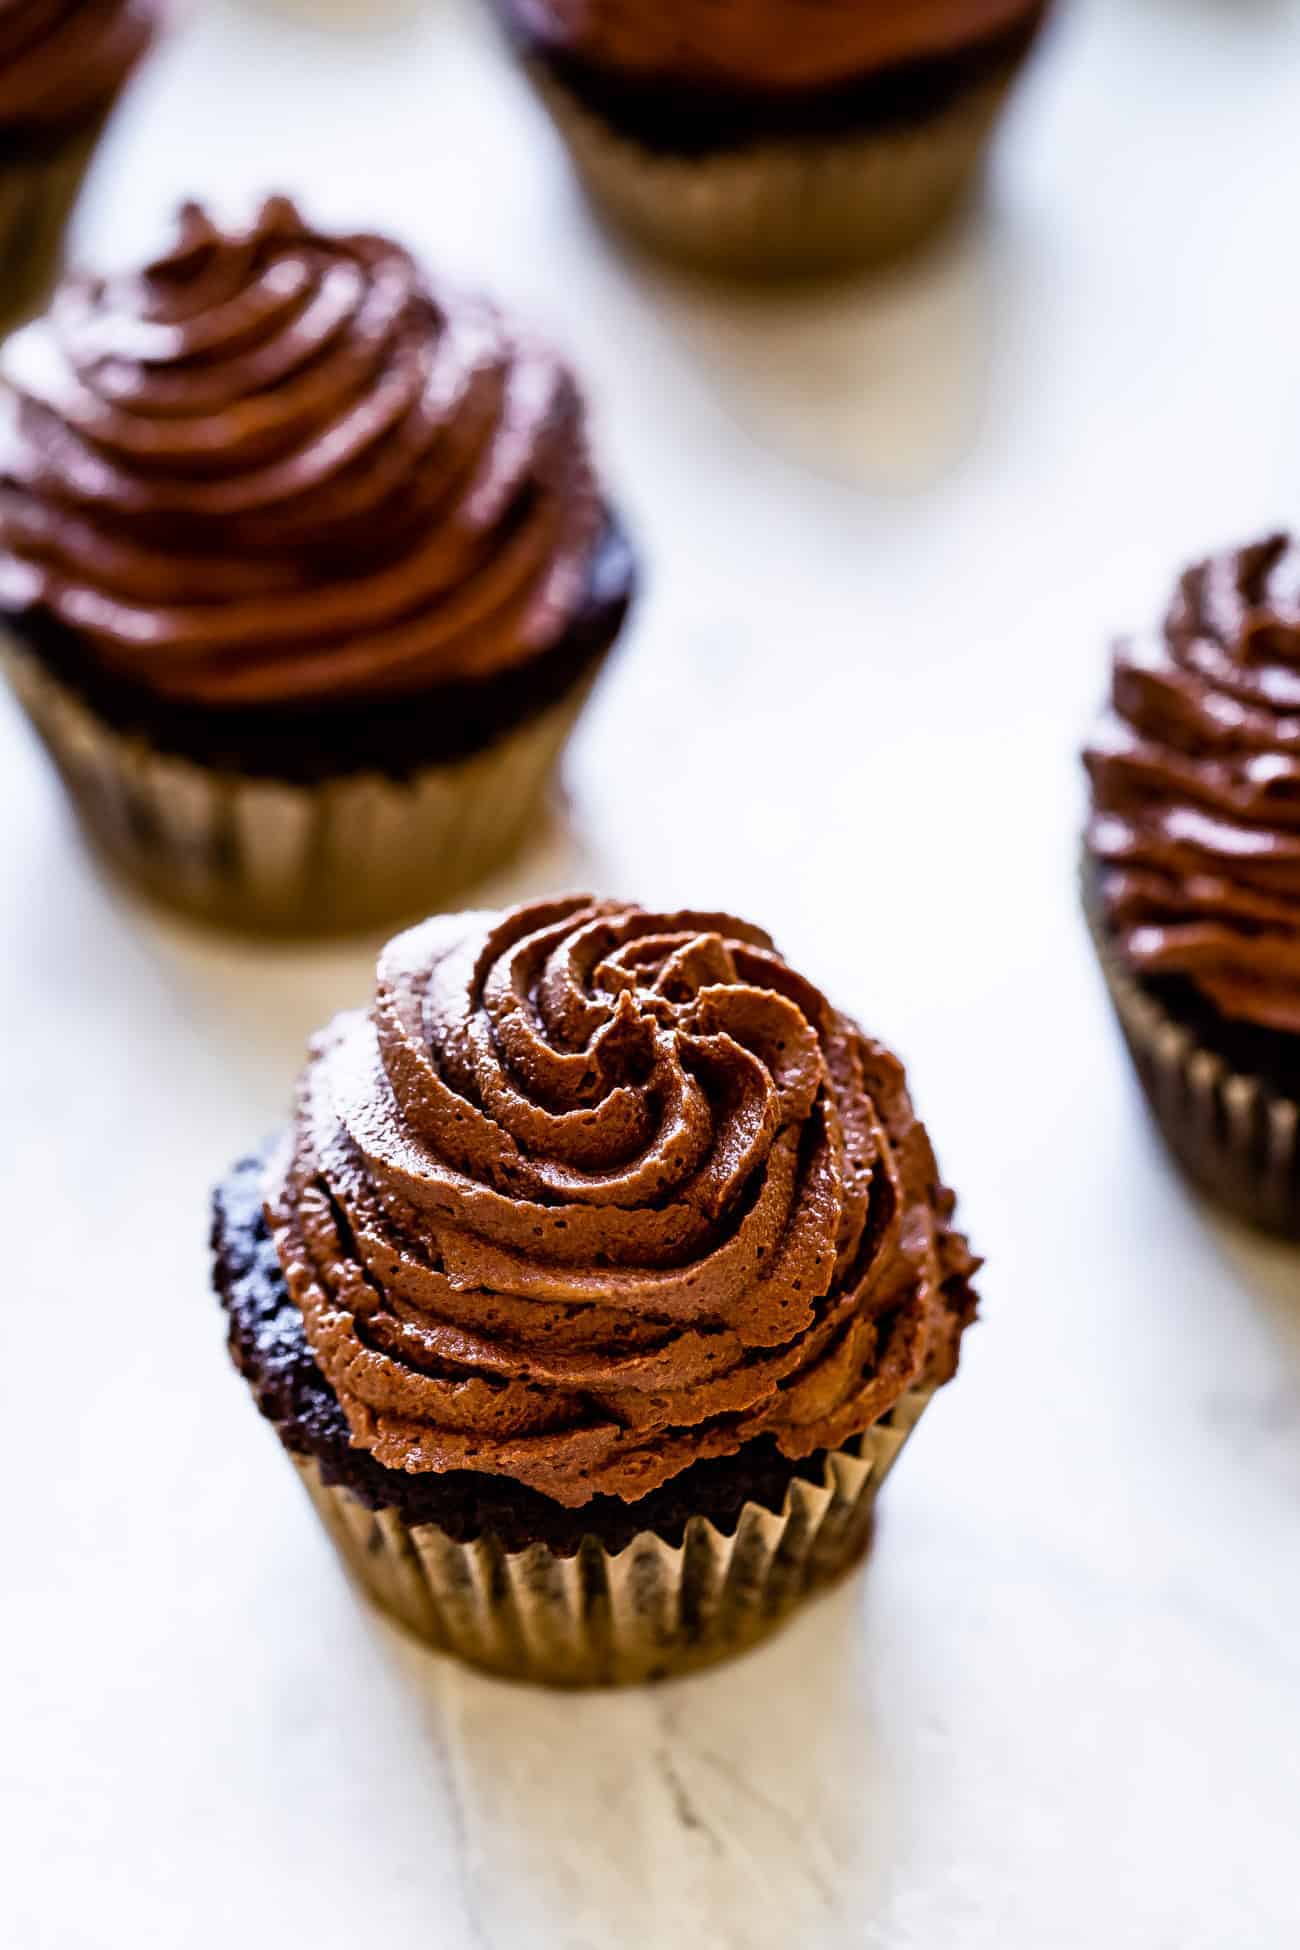 paleo chocolate buttercream frosted on chocolate cupcakes on a marble board